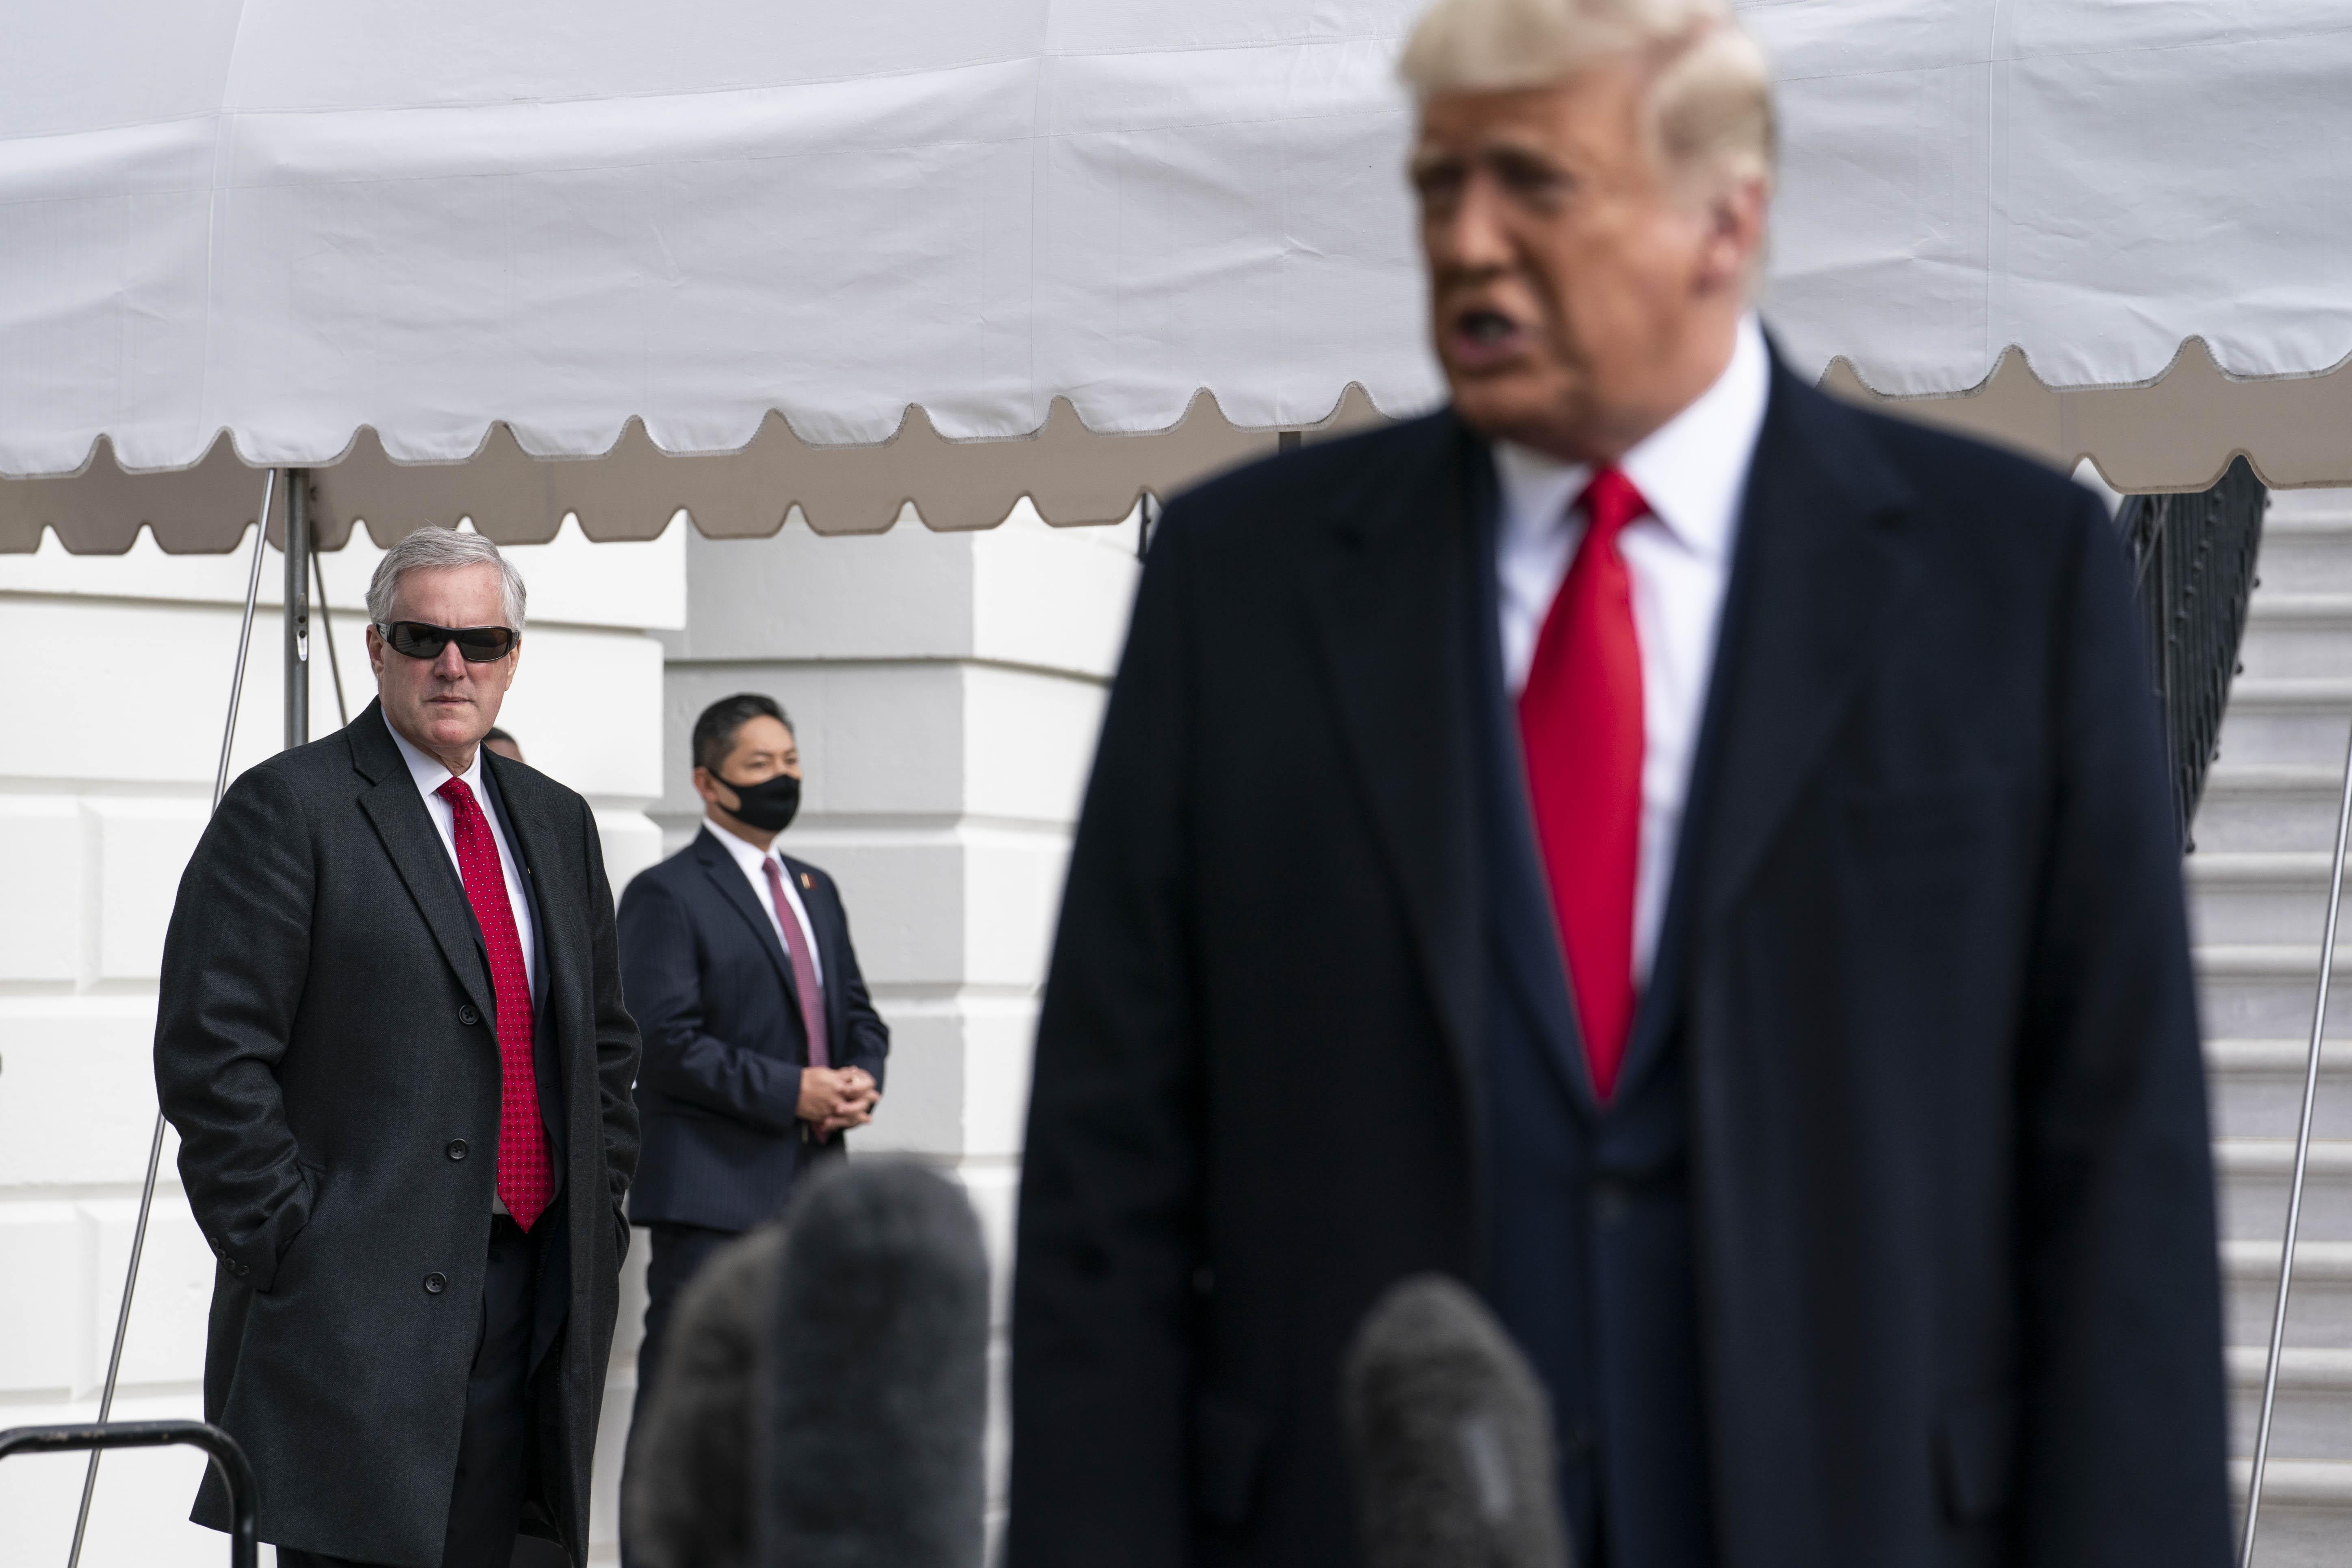 Meadows wearing sunglasses behind Trump emulating almost his entire look, with a oversized black coat and red tie.